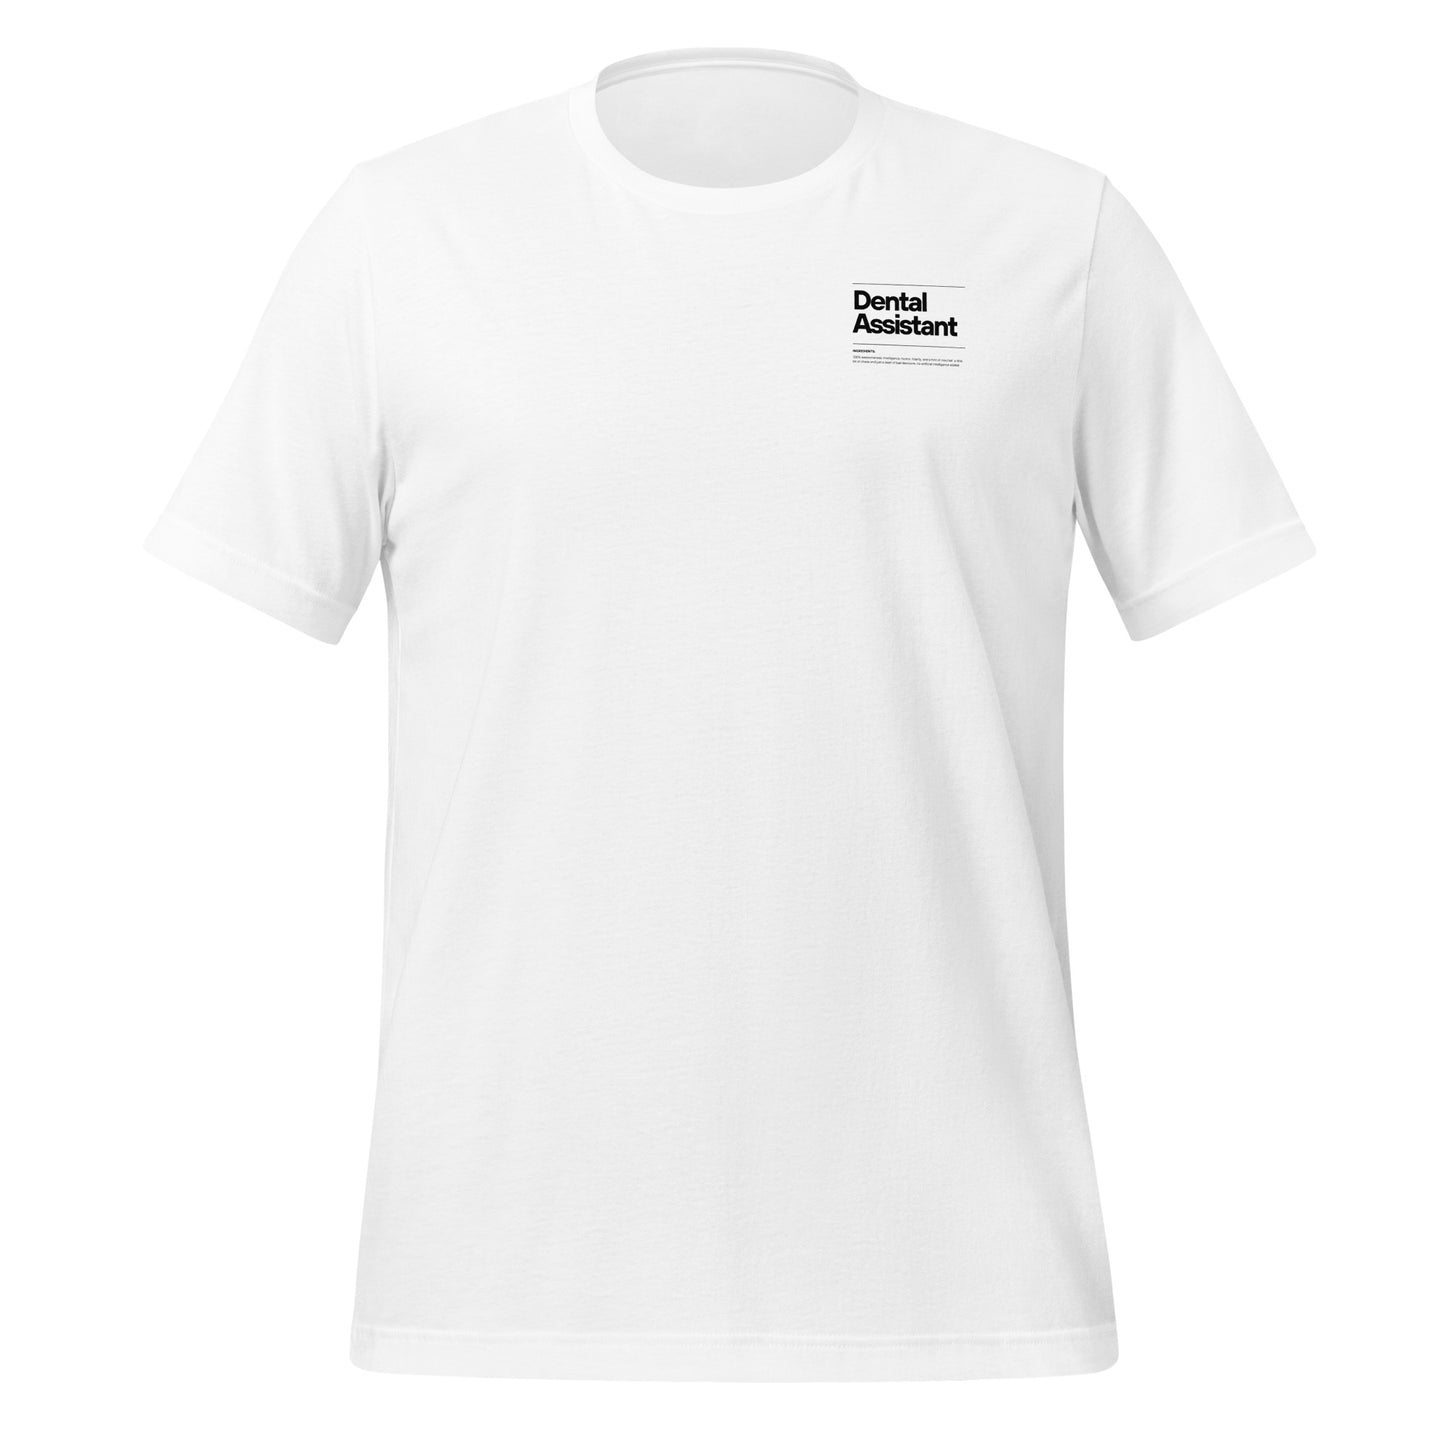 White dental assistant shirt featuring a creative label design with icons and text, perfect for dental assistants who want to express their identity and passion for their job - dental shirts front view.